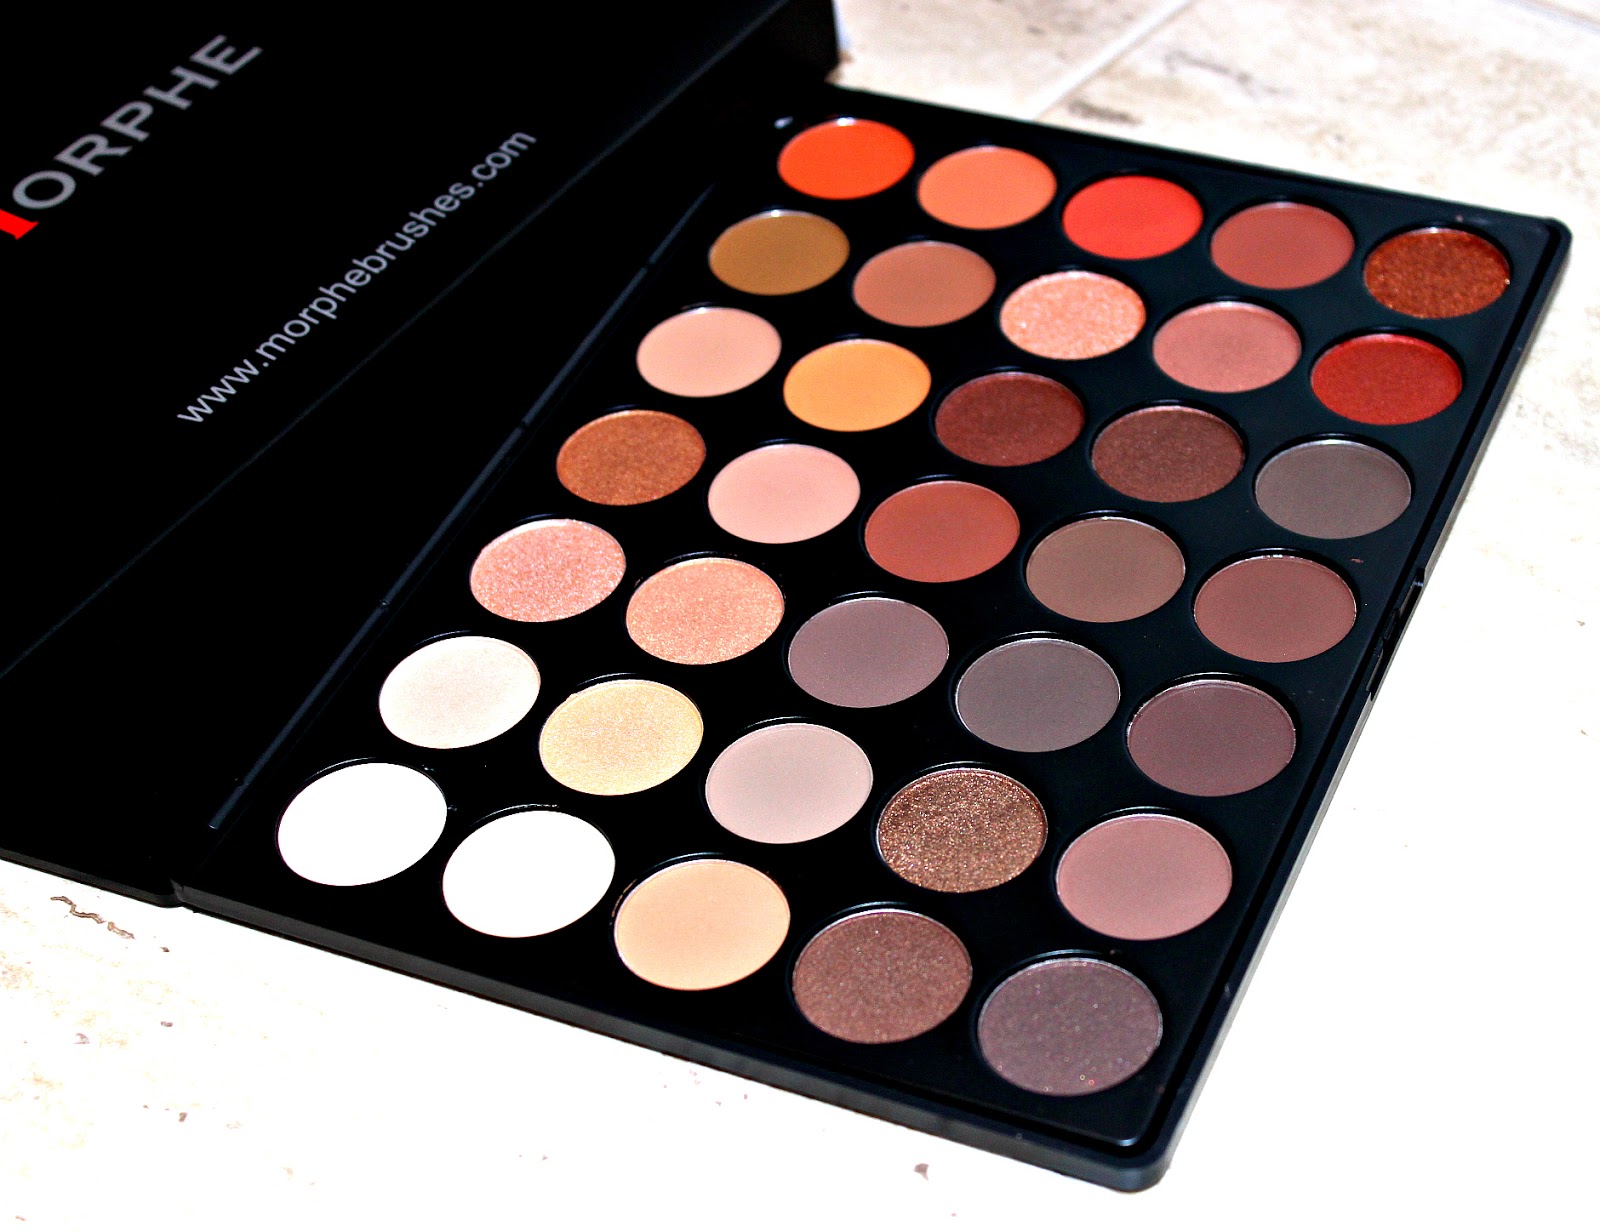 Today I am writing about the infamous Morphe 350 Palette, that I have recen...